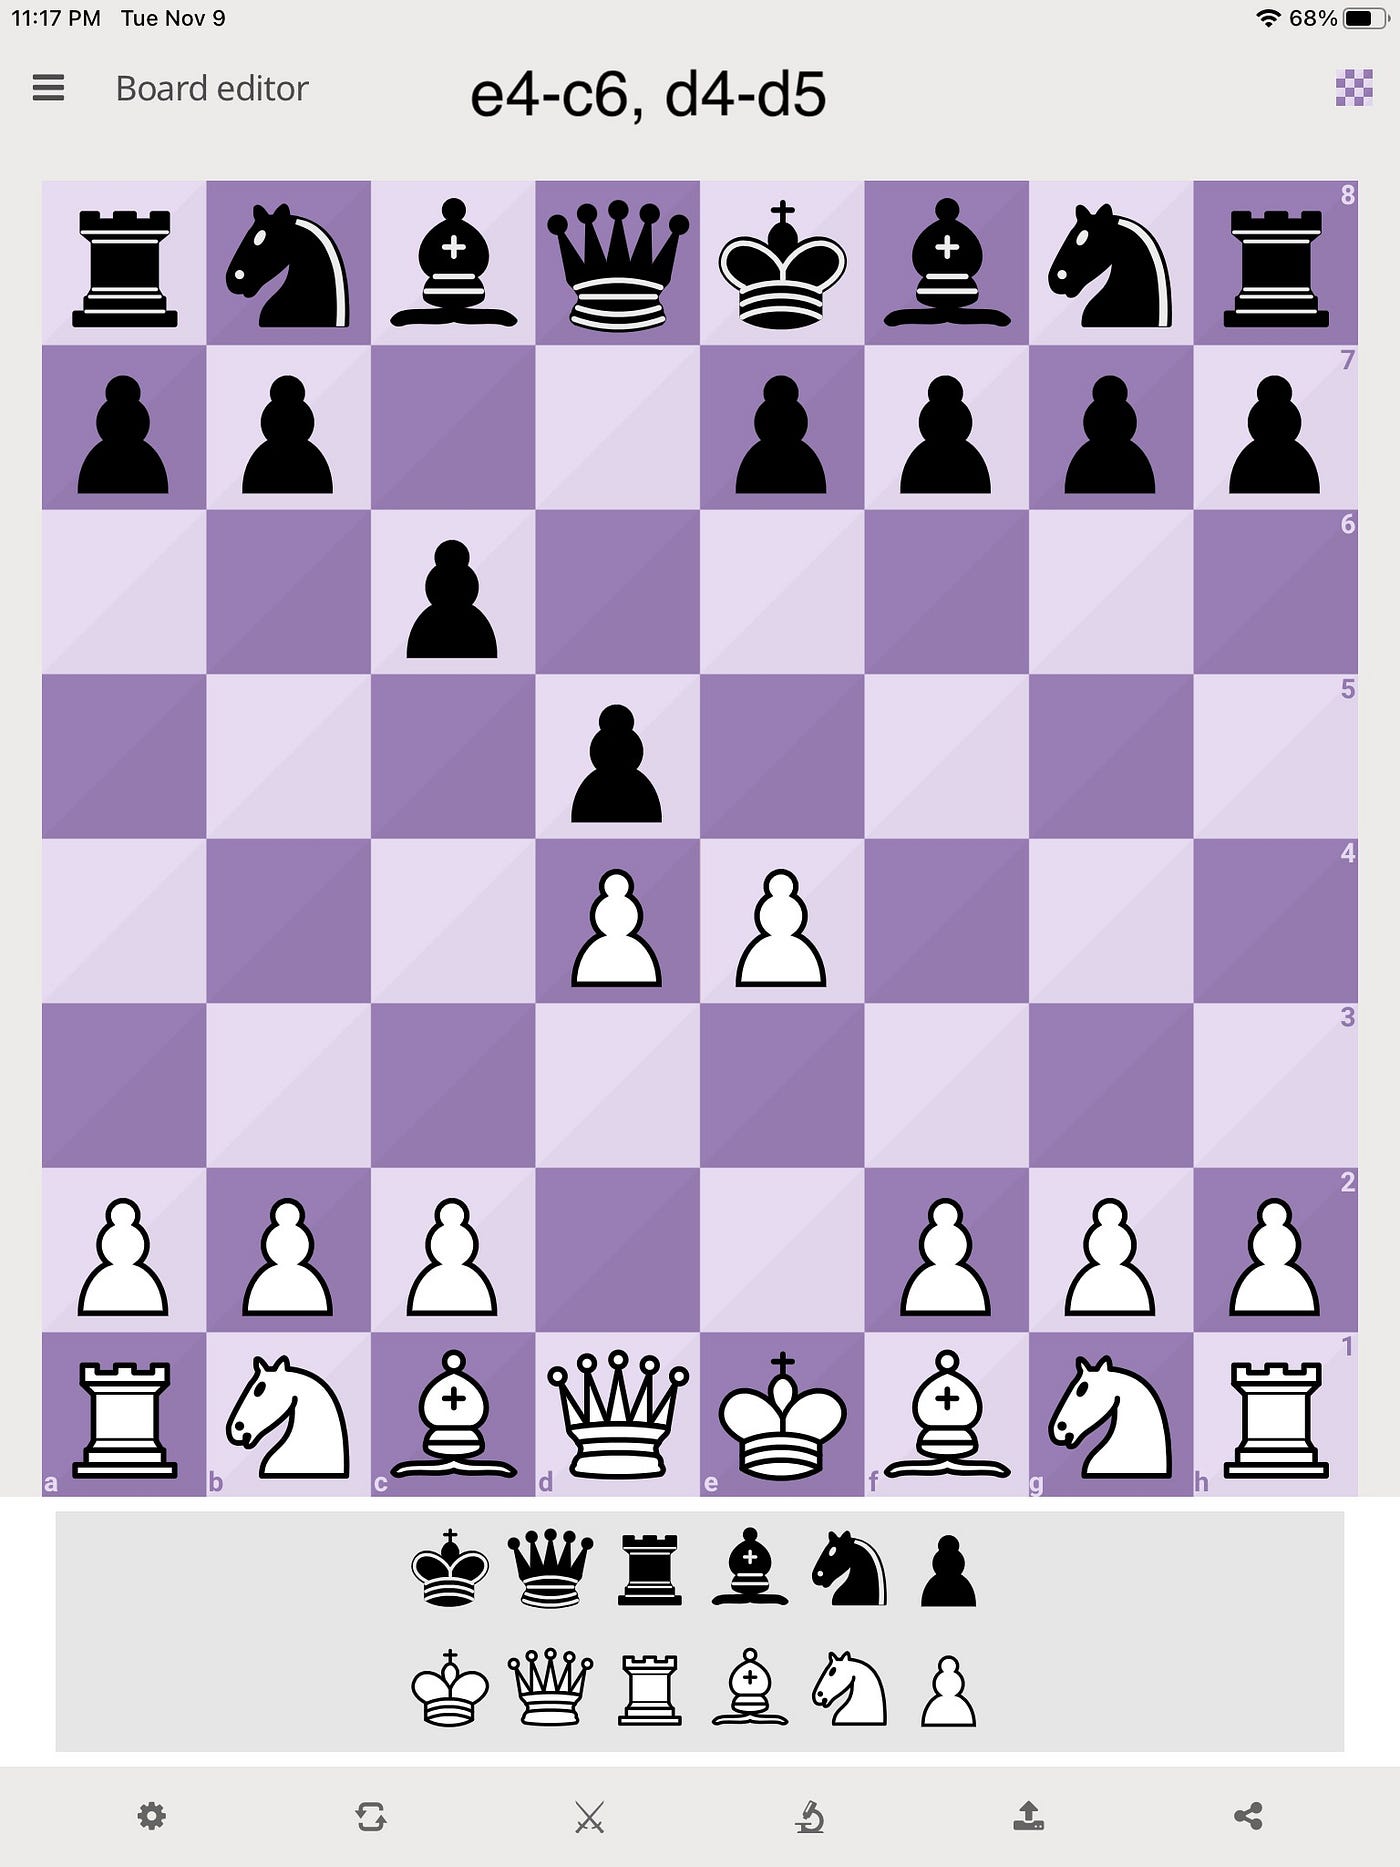 Chess Opening Names by Image Quiz - By Escarasnail